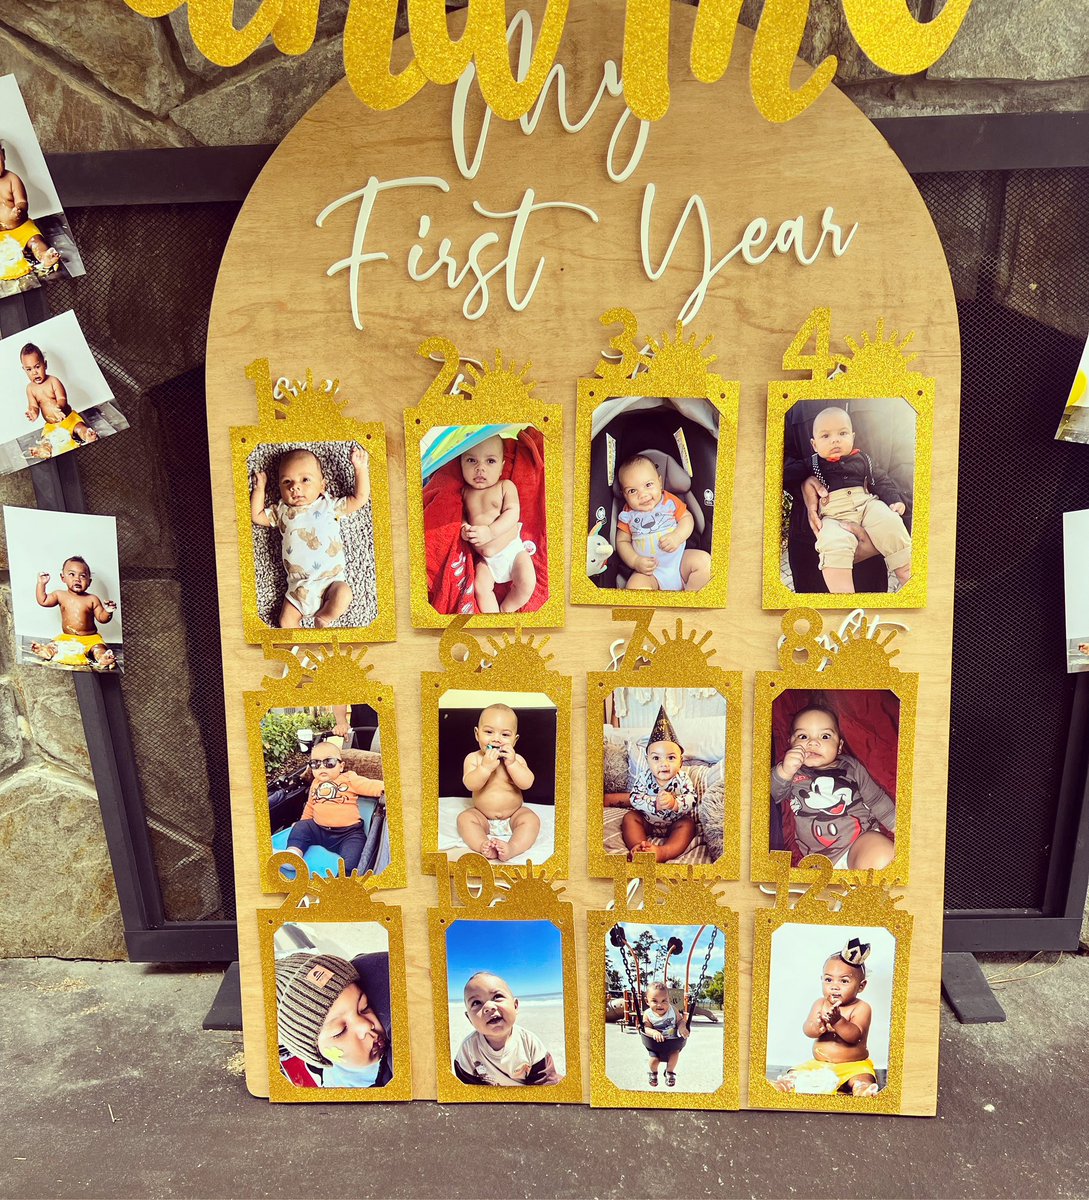 Happy 1st Birthday Hendrix!🧡🎉 
To all my Mamas, rent this first year photo board for your baby’s first birthday. You won’t be disappointed! 🤩
•
#babysfirstbirthday #firstbirthday #firstbirthdayideas #firstbirthdayphotoshoot #firstbirthdaydecor #firstbirthdayparty